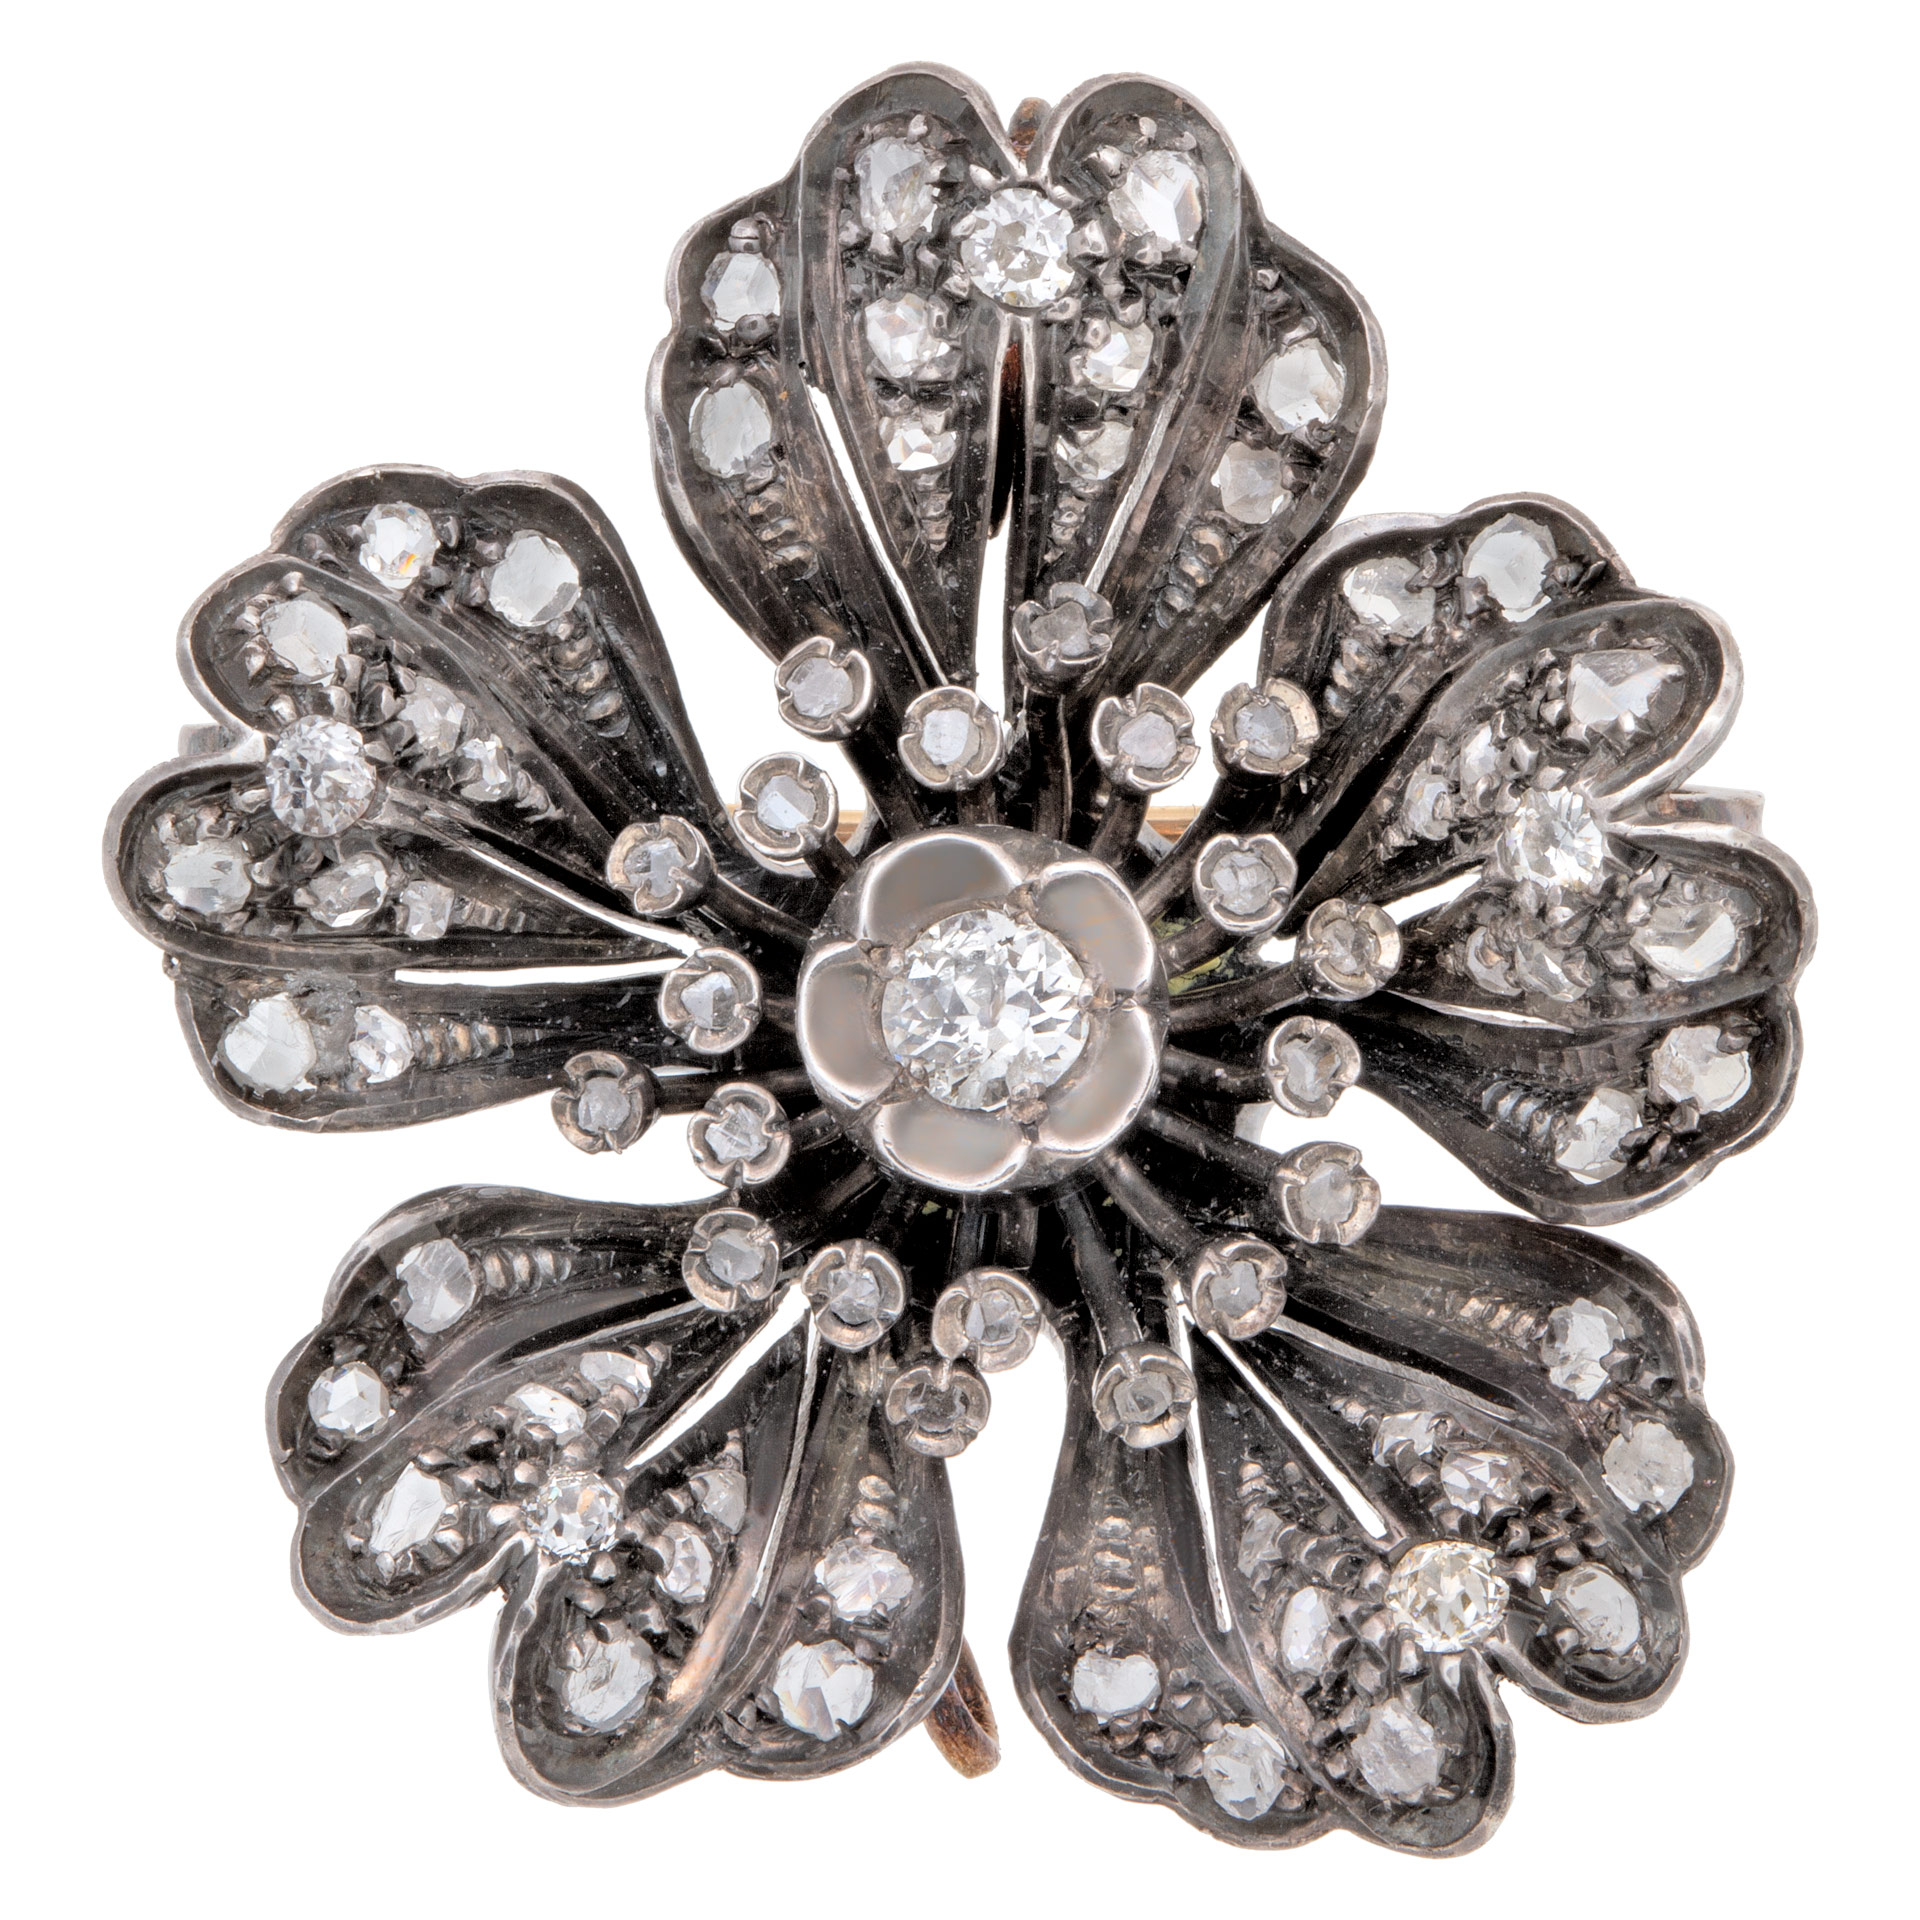 VIcorian brooch, pendant with approx. 2.00 carats old mine cut diamonds, set in sliver top and gold. image 1